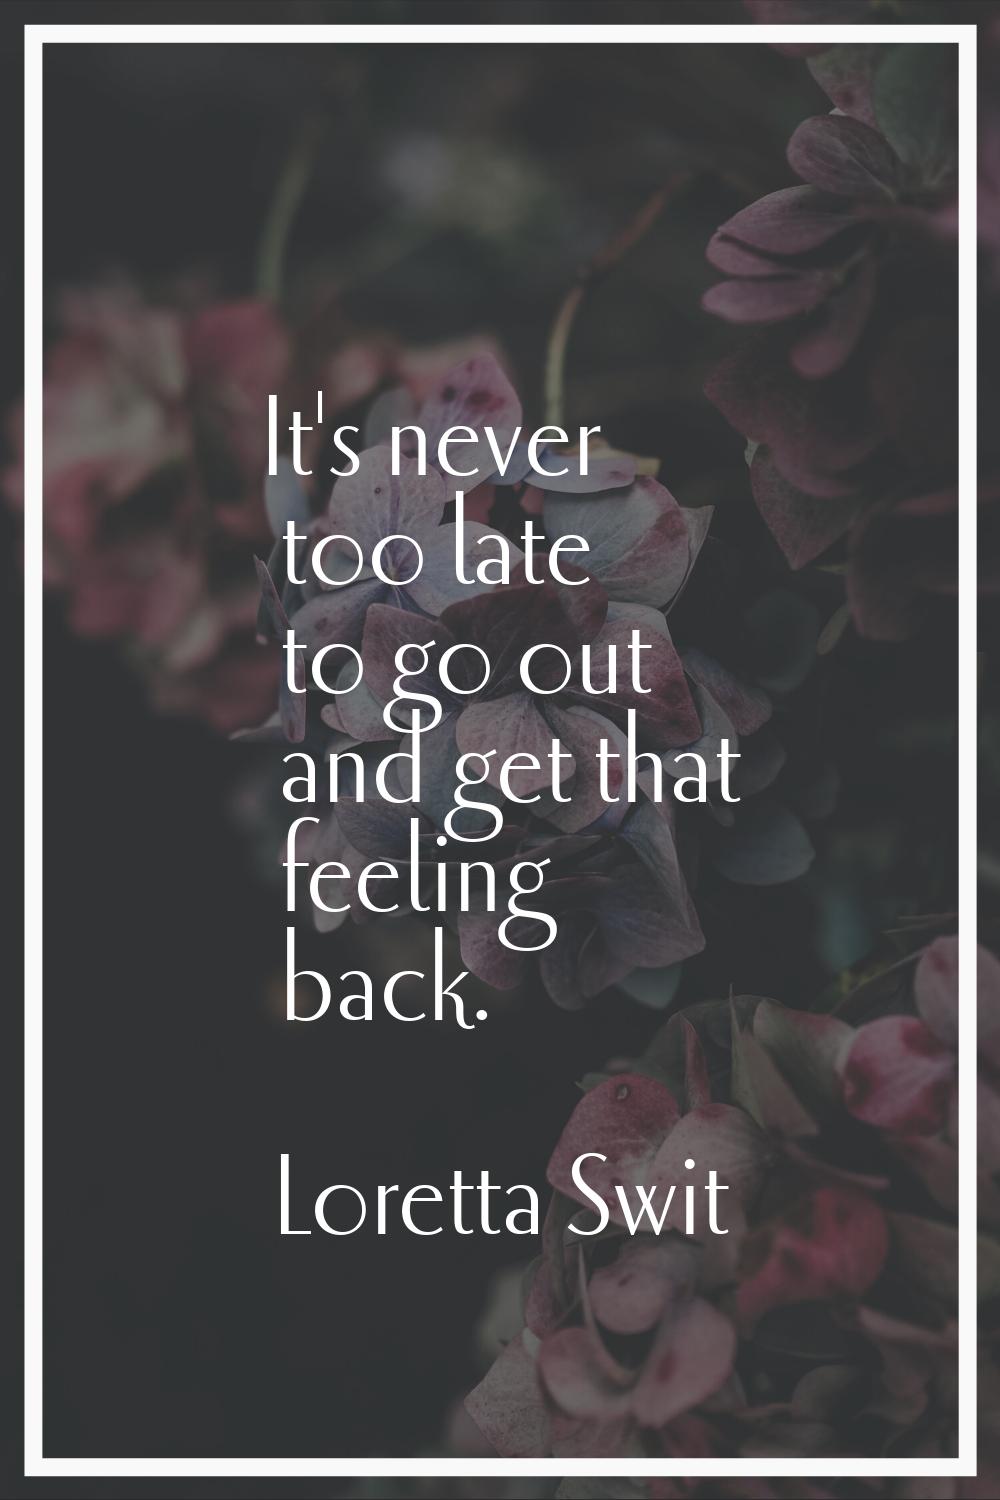 It's never too late to go out and get that feeling back.